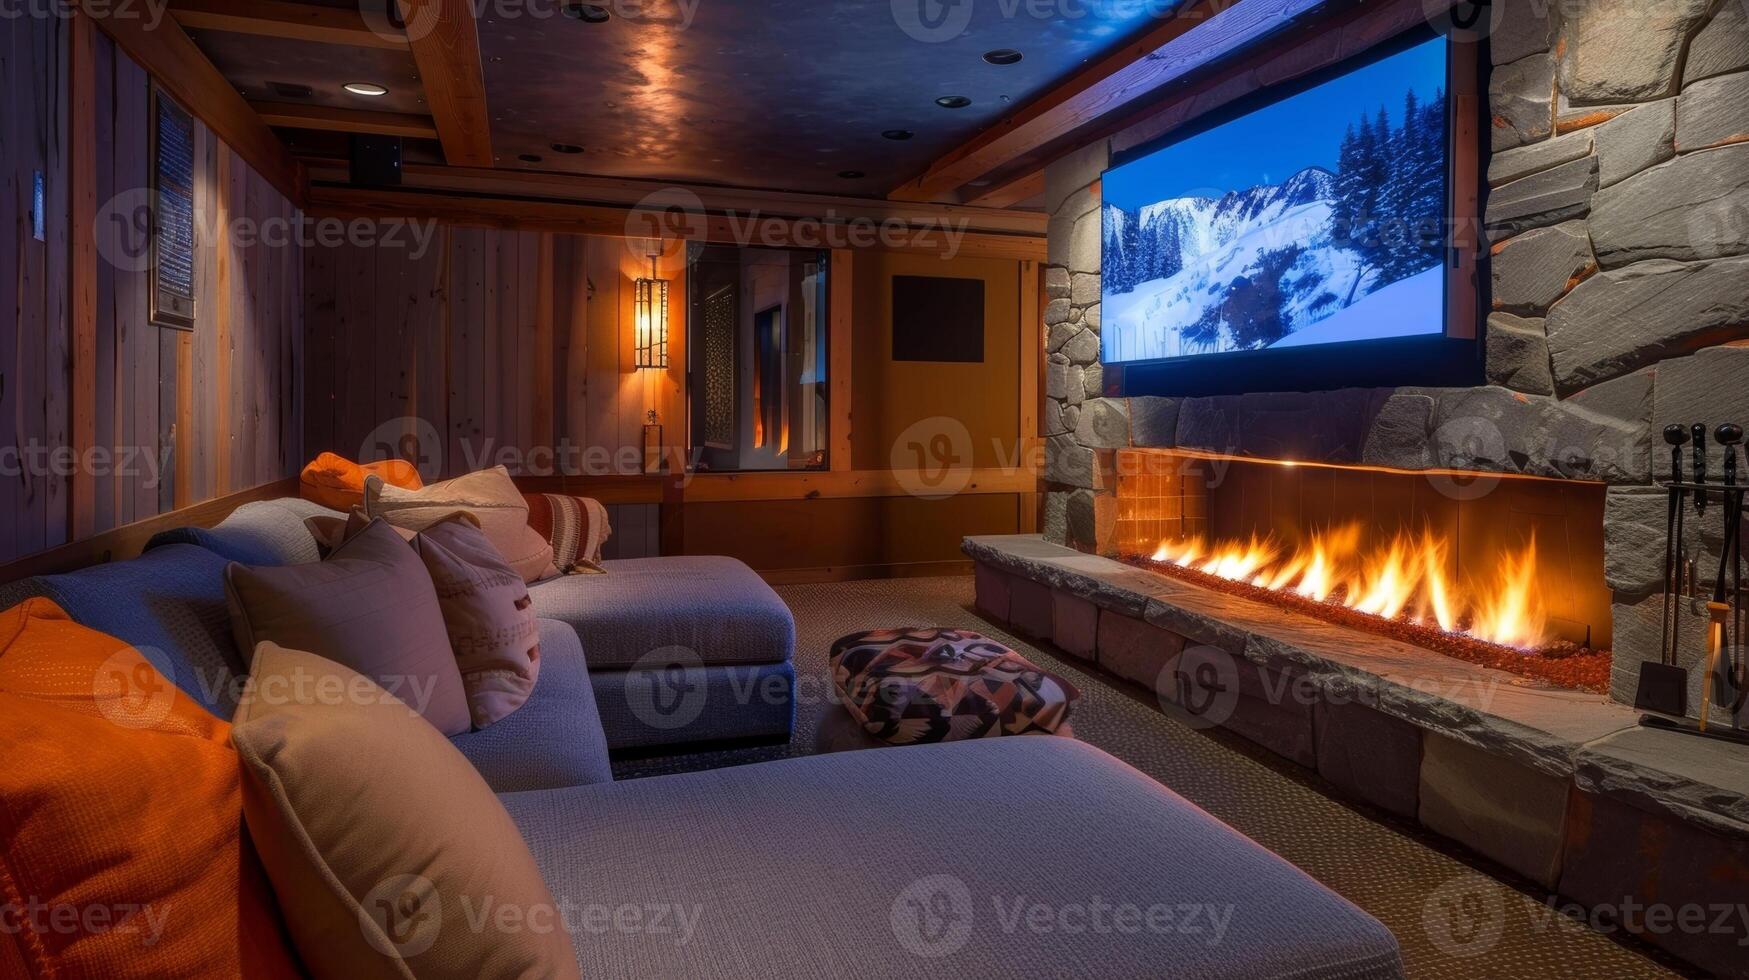 The crackling of the fire and the sound of your favorite music playing through the surround sound system create the ultimate relaxation experience. 2d flat cartoon photo